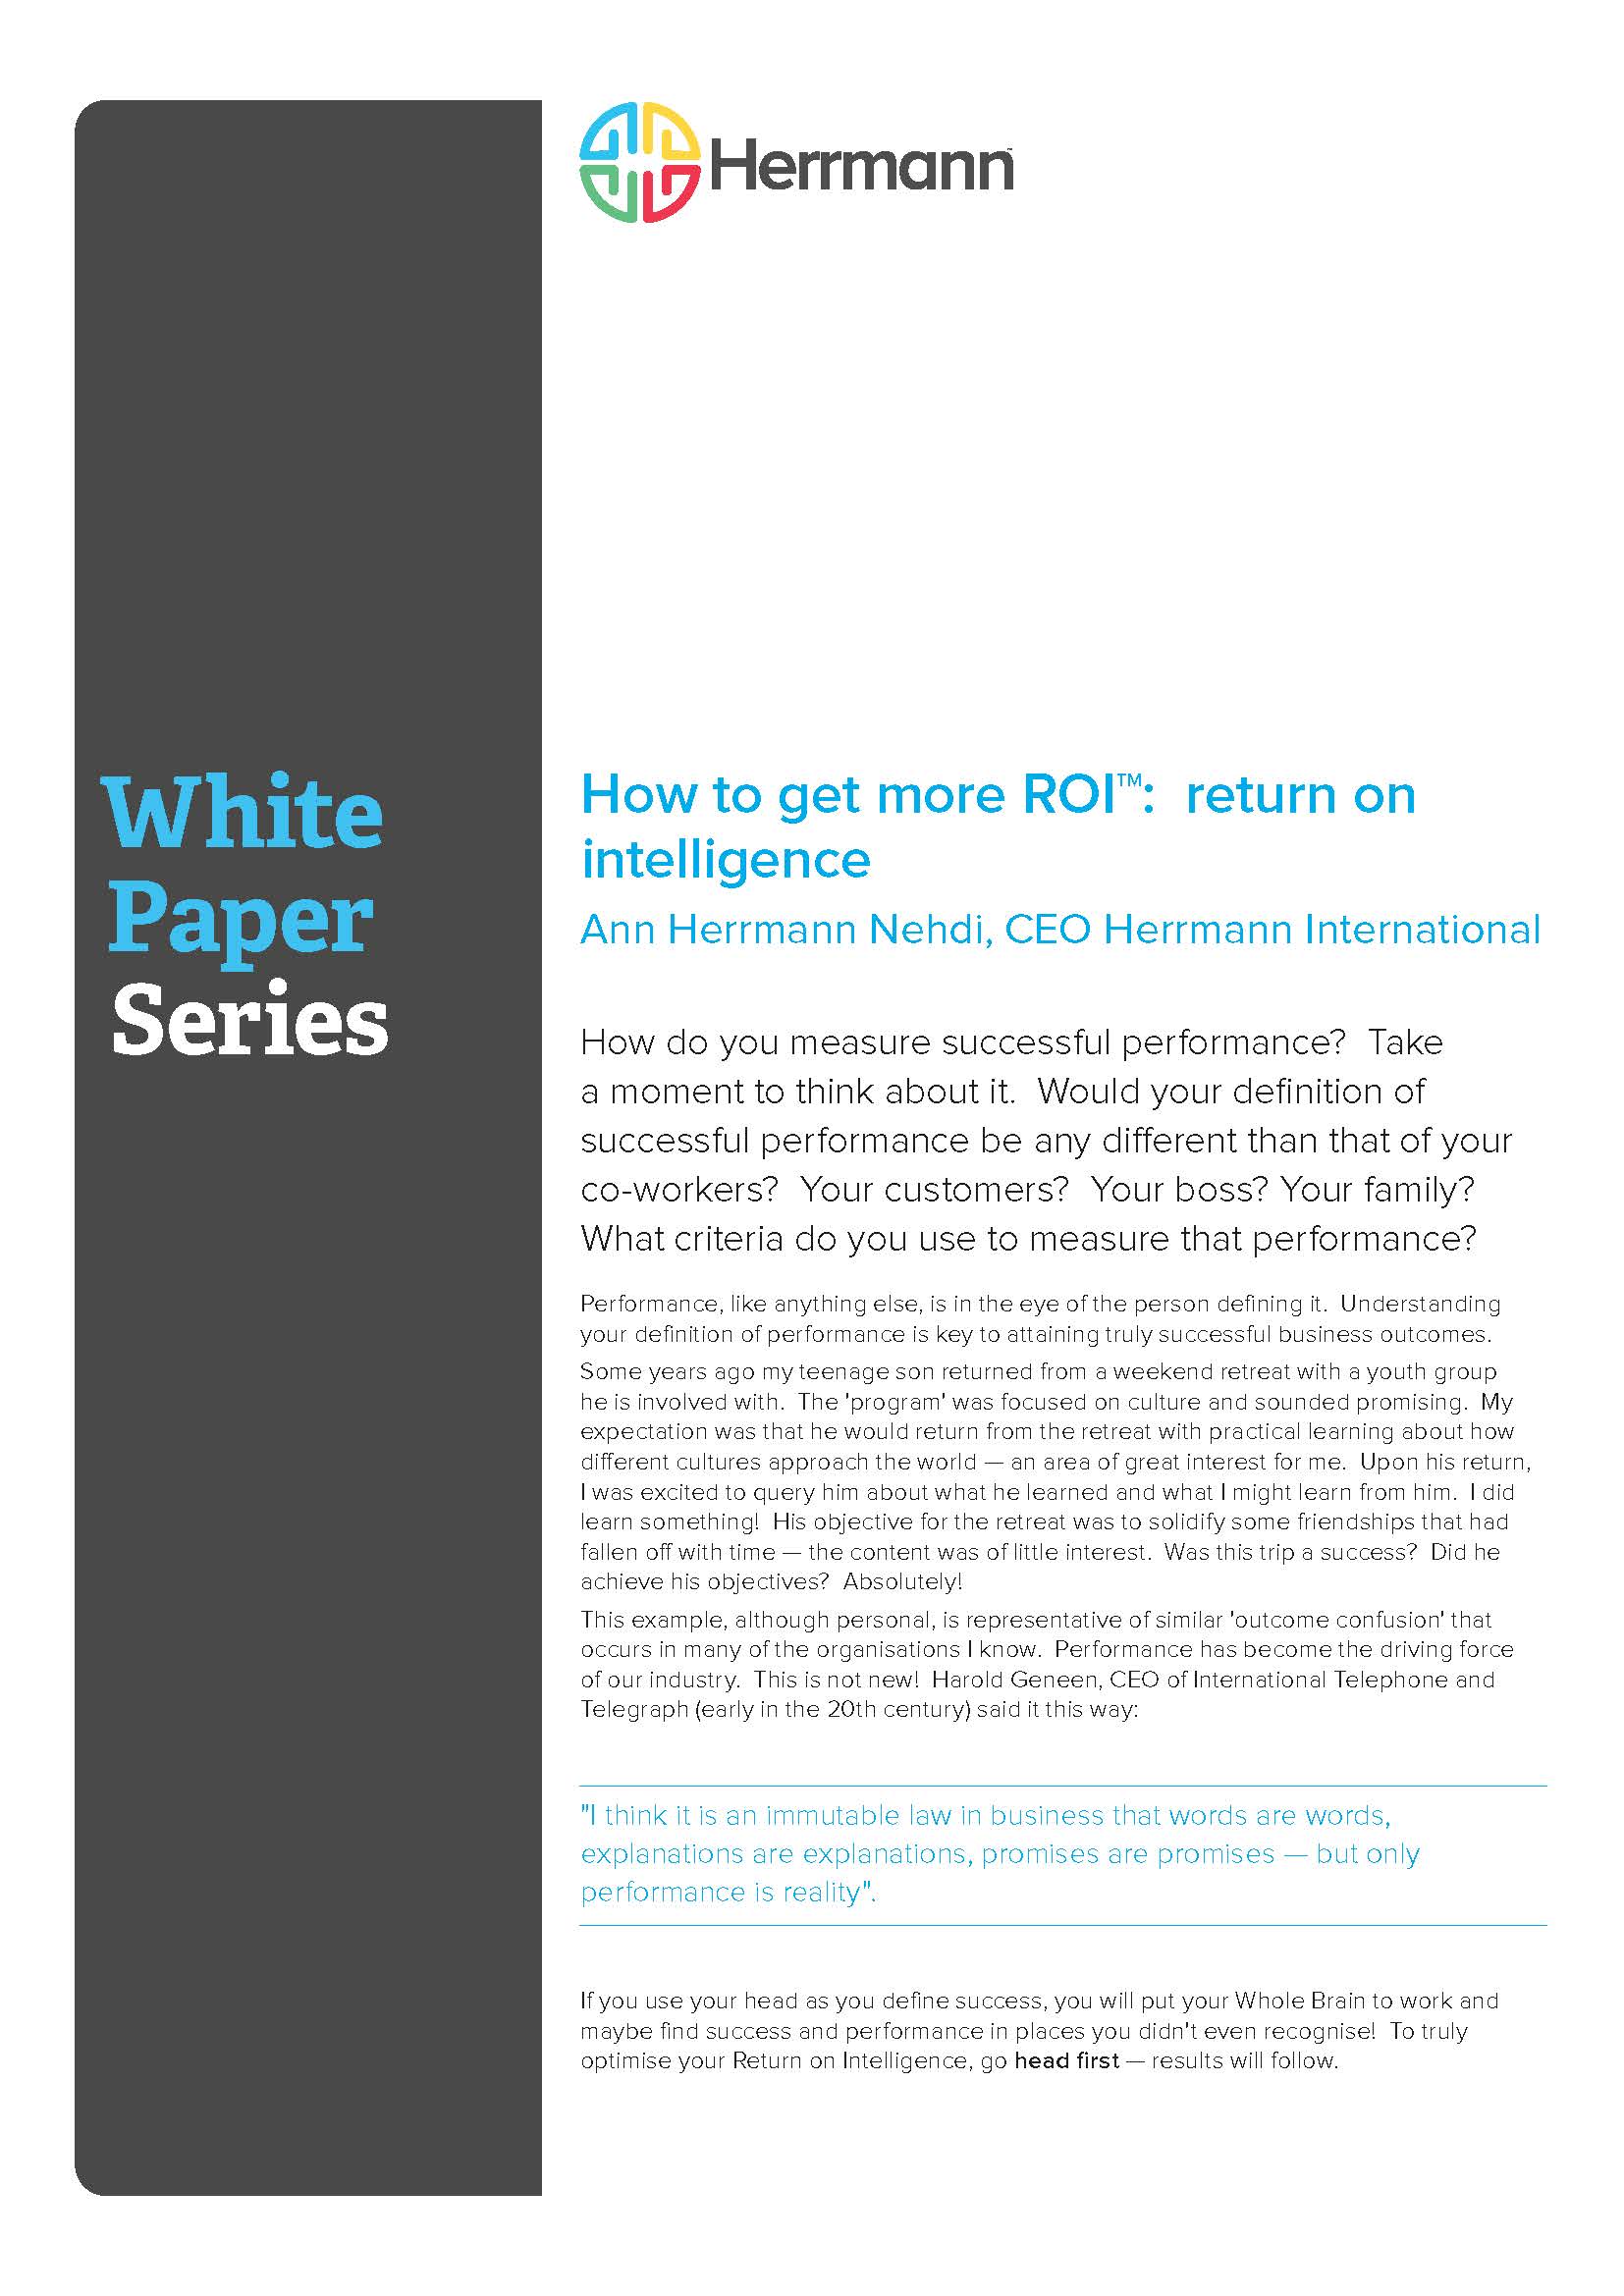 White Paper - How To Get More ROI